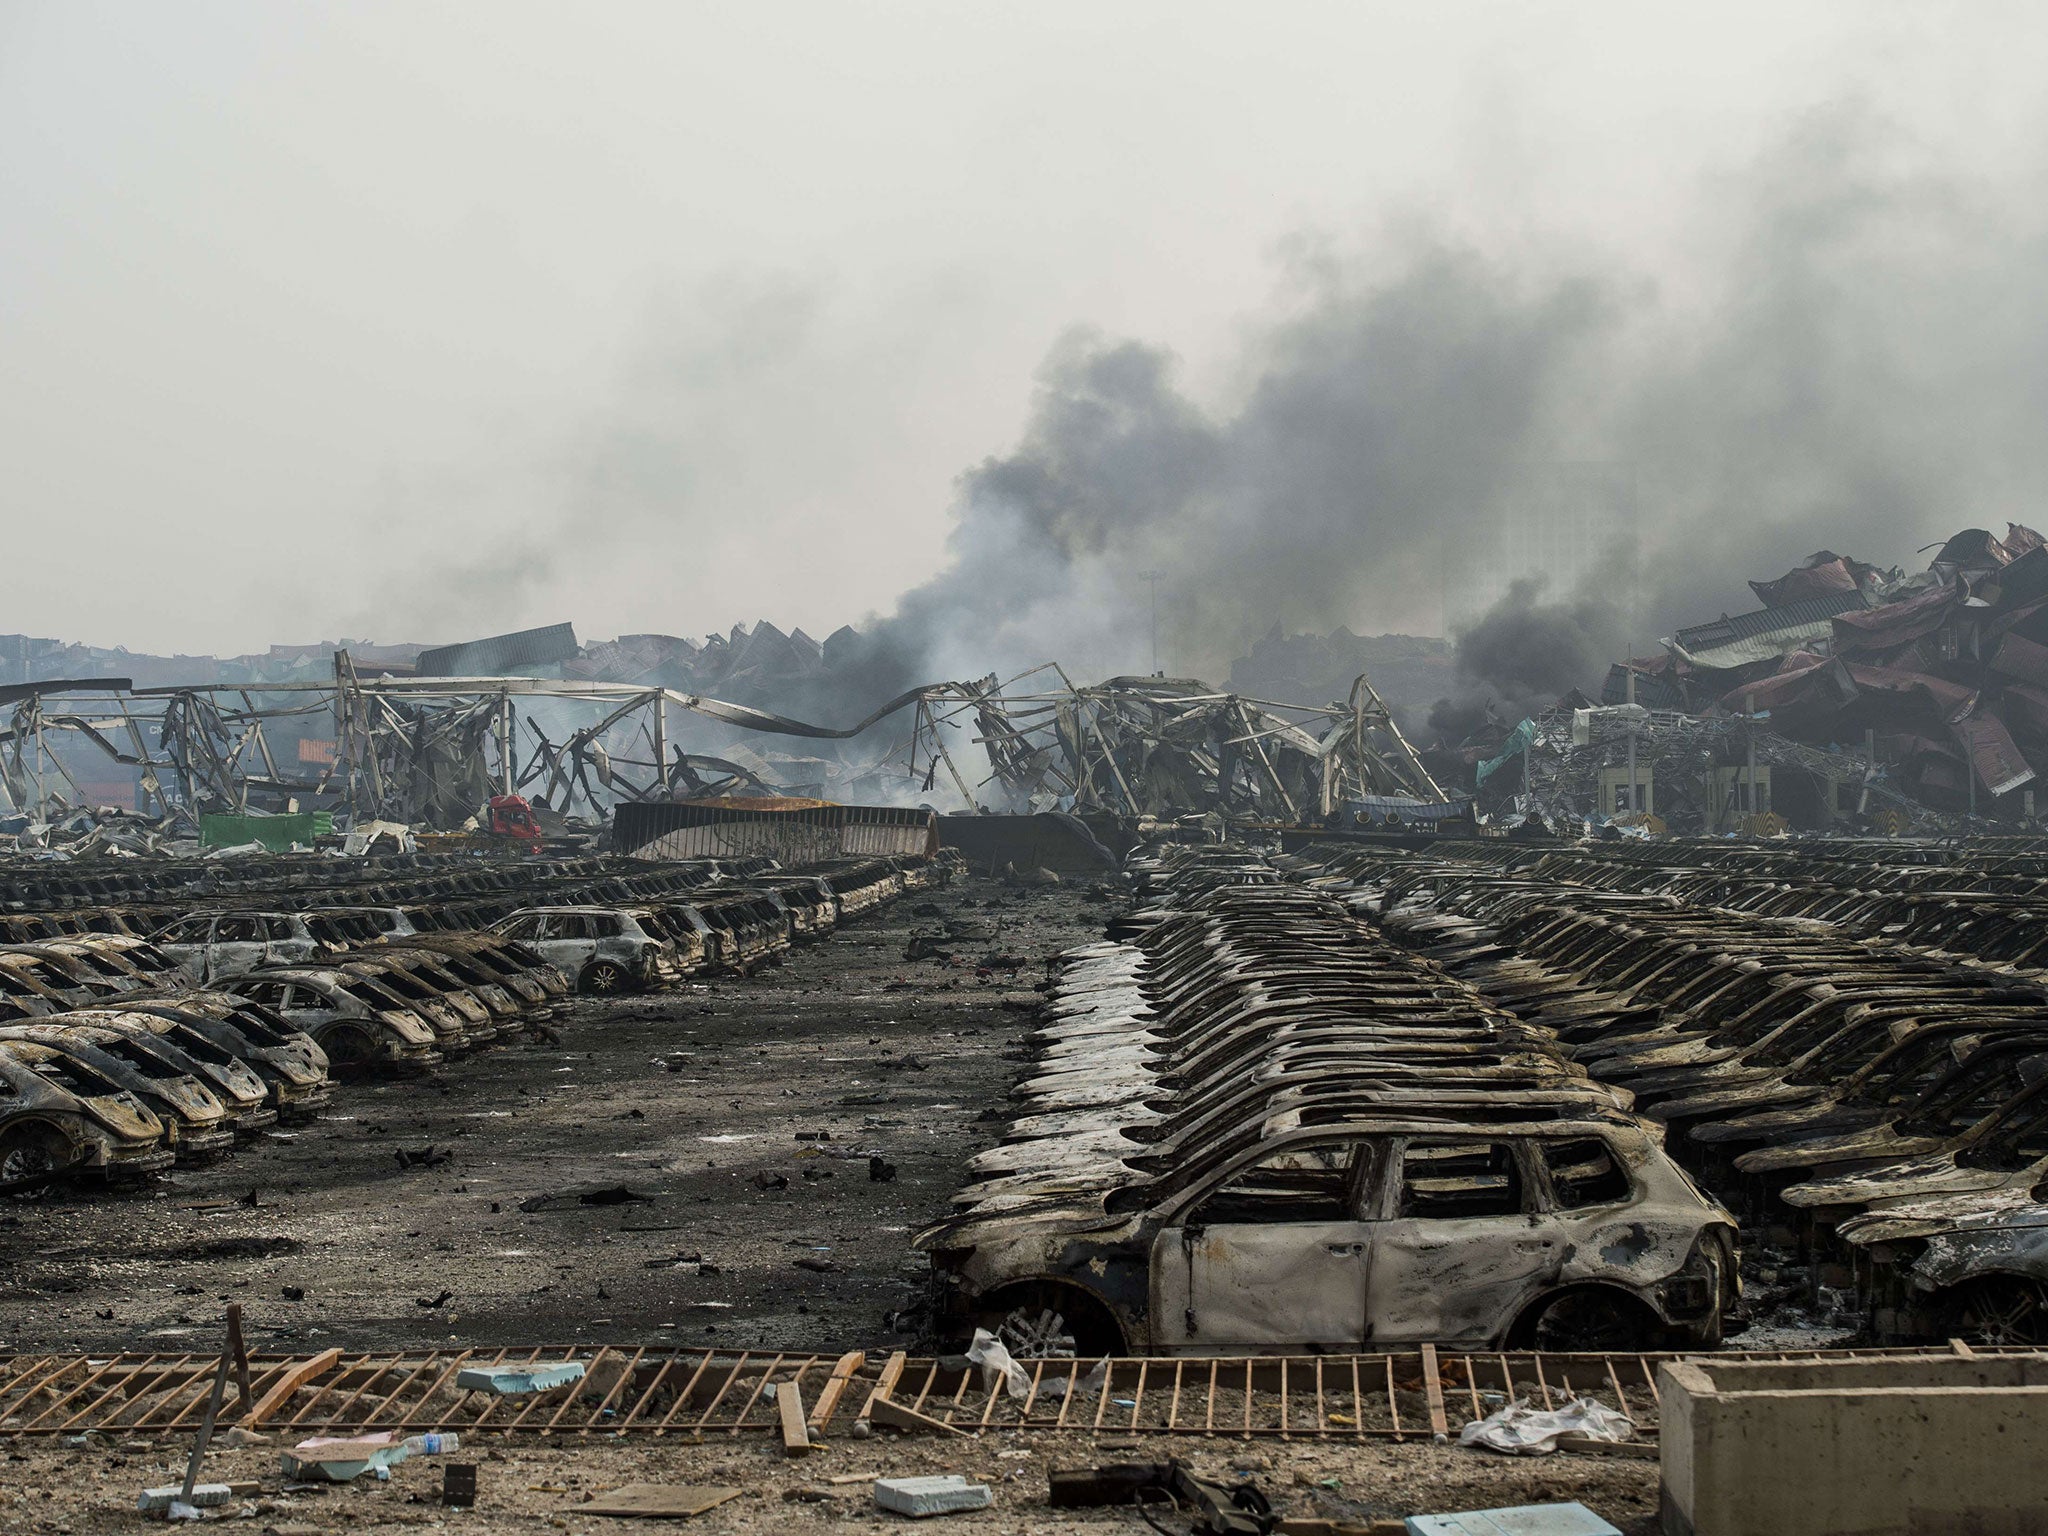 Smoke billows from behind burnt out Volkswagen cars the second morning after a series of explosions at a chemical warehouse hit the city of Tianjin